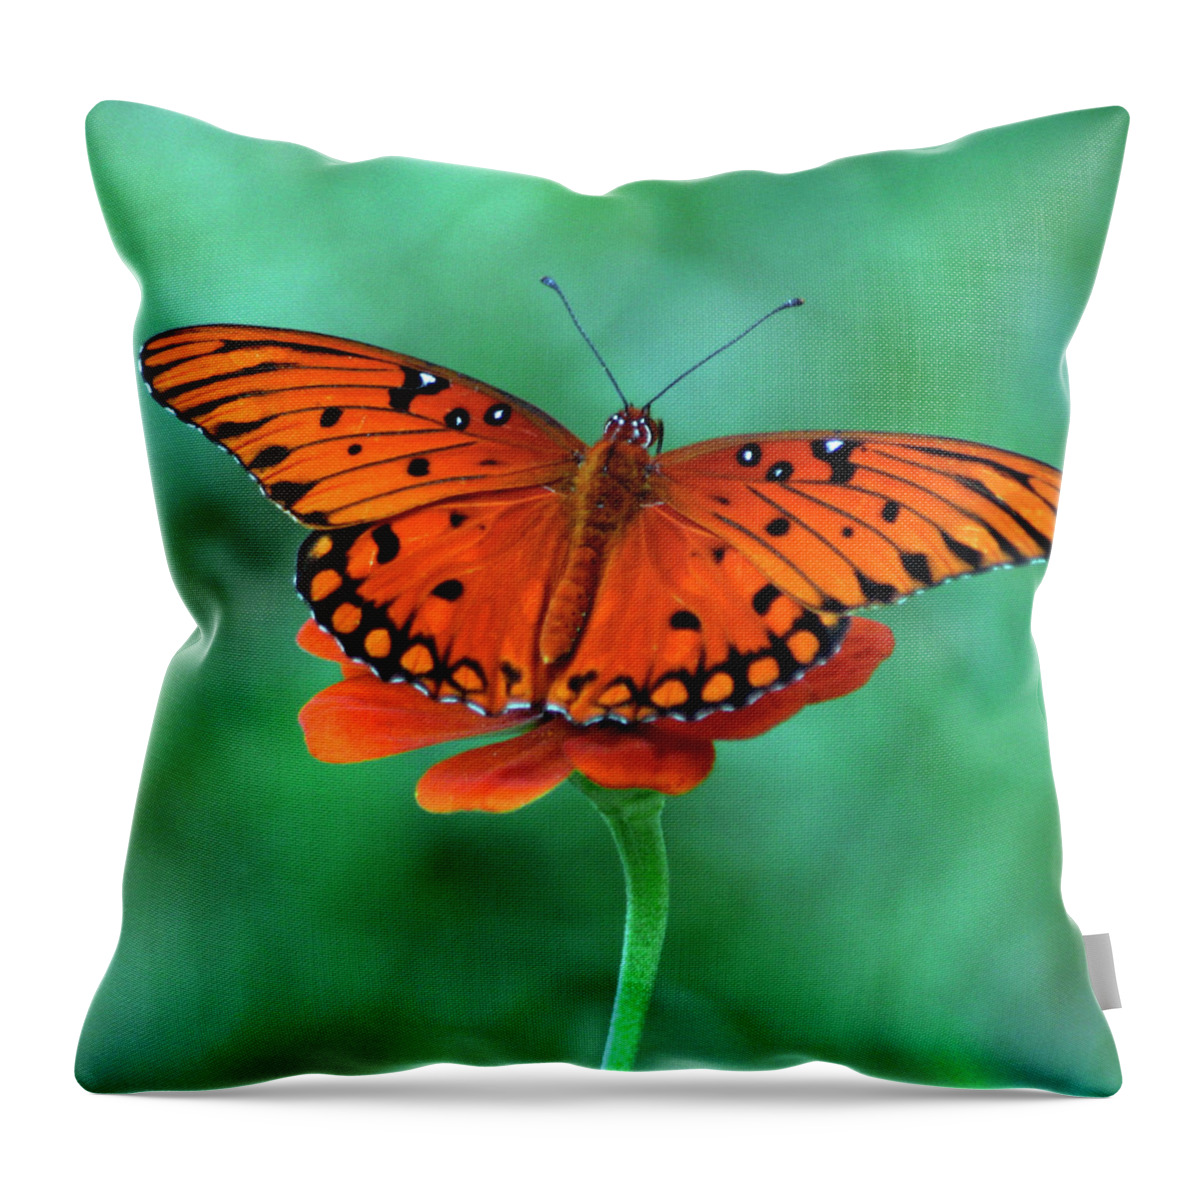 Animal Themes Throw Pillow featuring the photograph Orange Crush by Martha Catherine Ivey